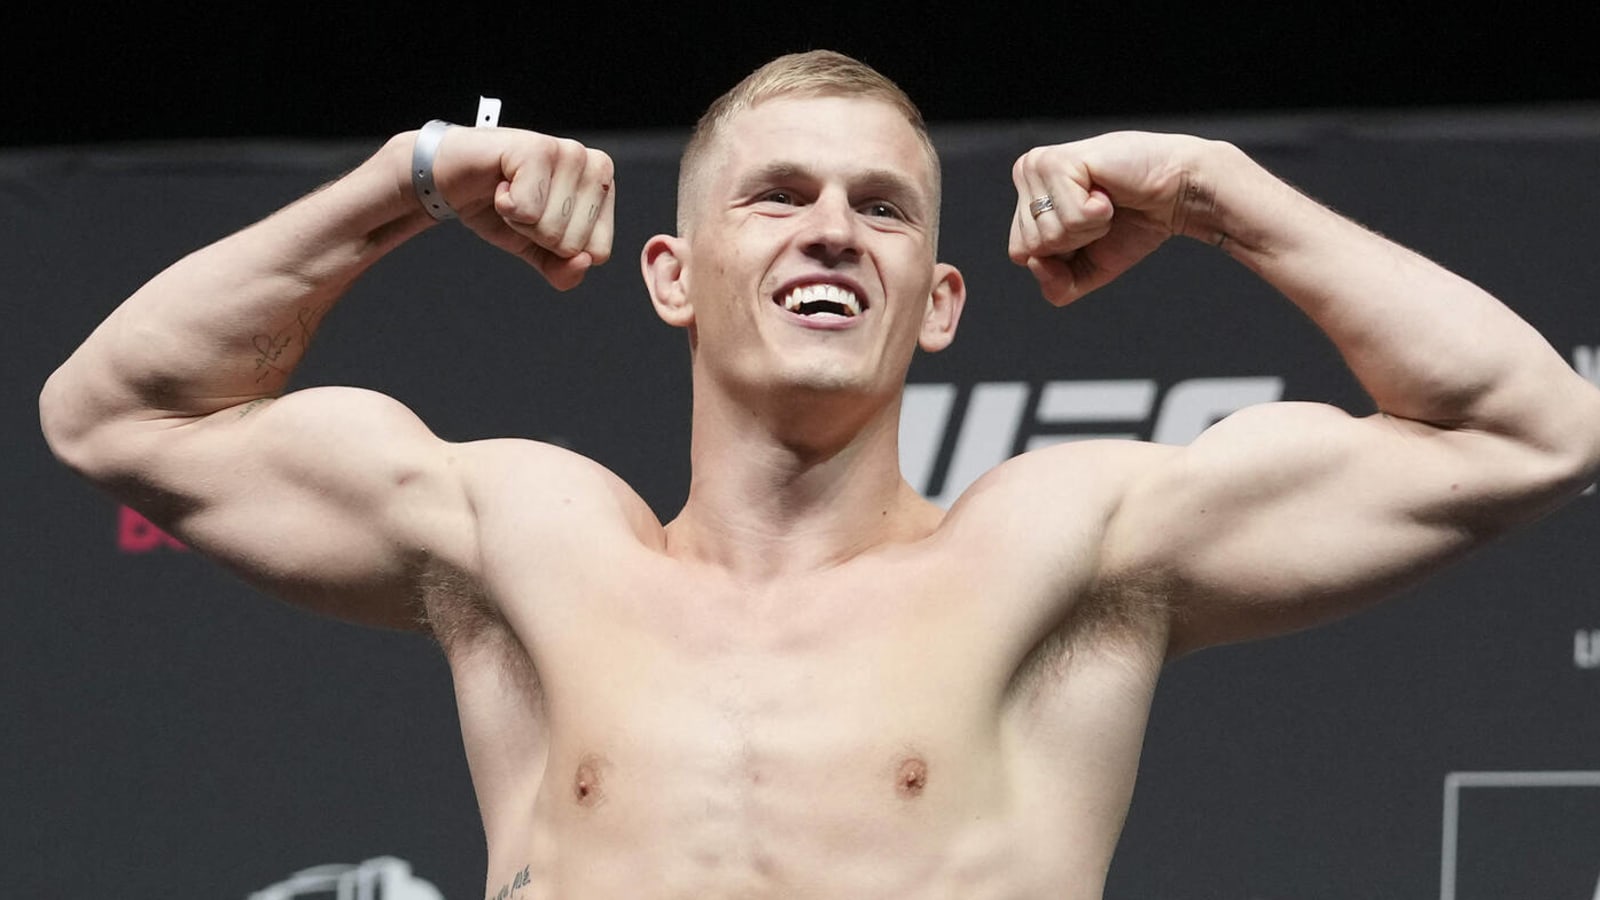 Ian Garry to face Gabriel Green at UFC 276 on July 2 in Las Vegas